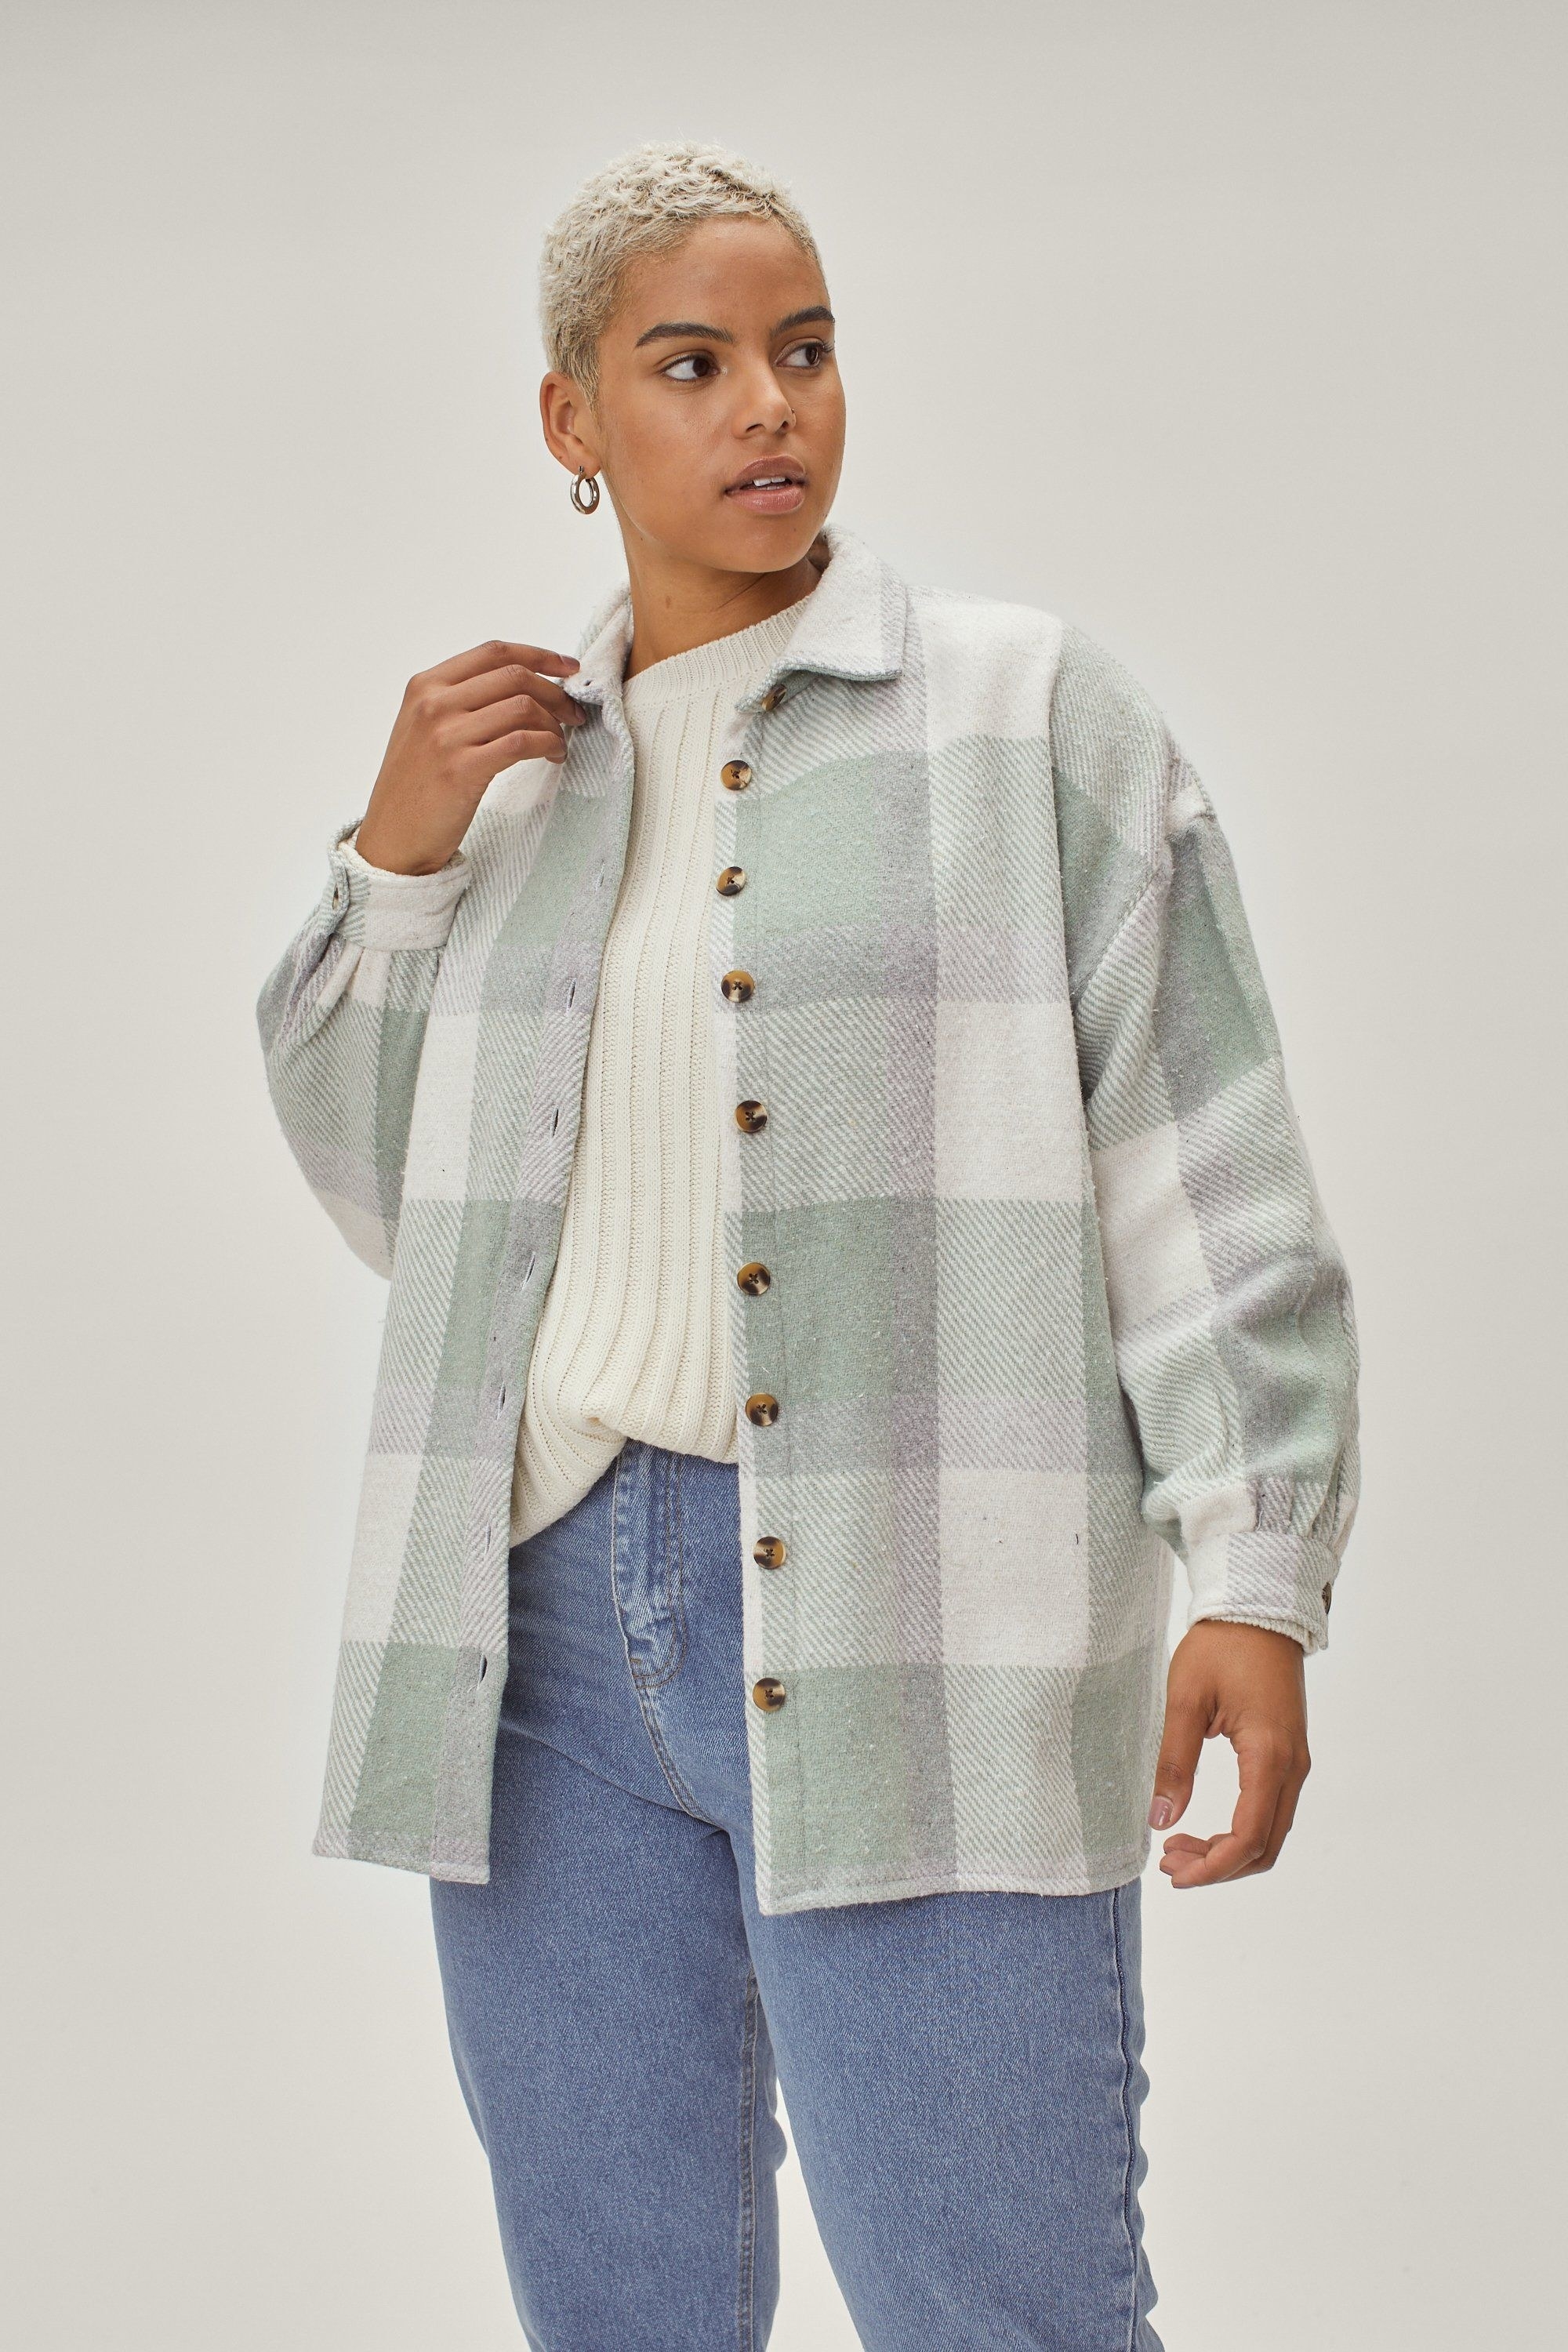 model wearing the mint and grey plaid shacket